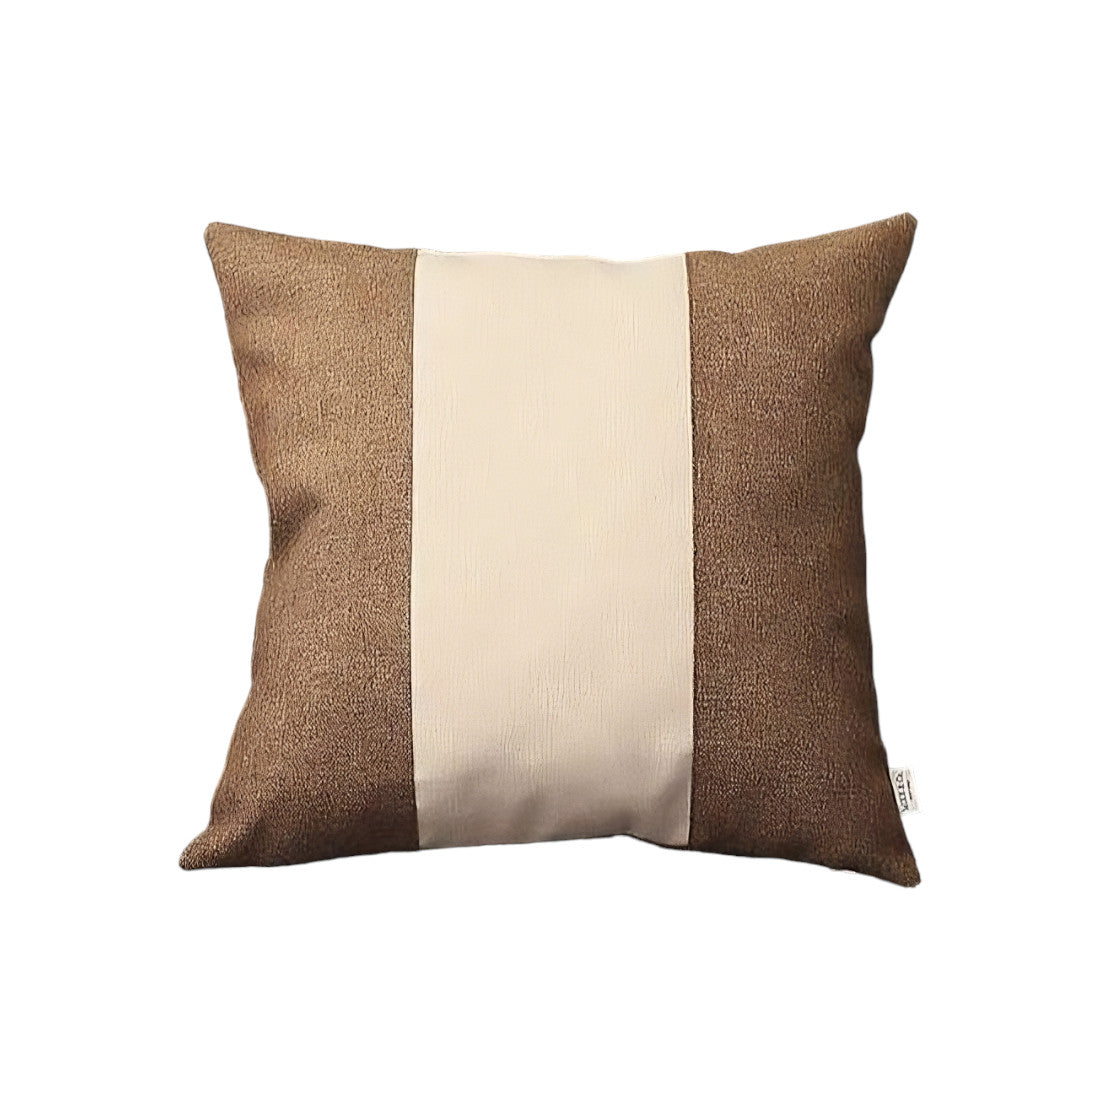 Set Of 4 Brown And White Center Pillow Covers